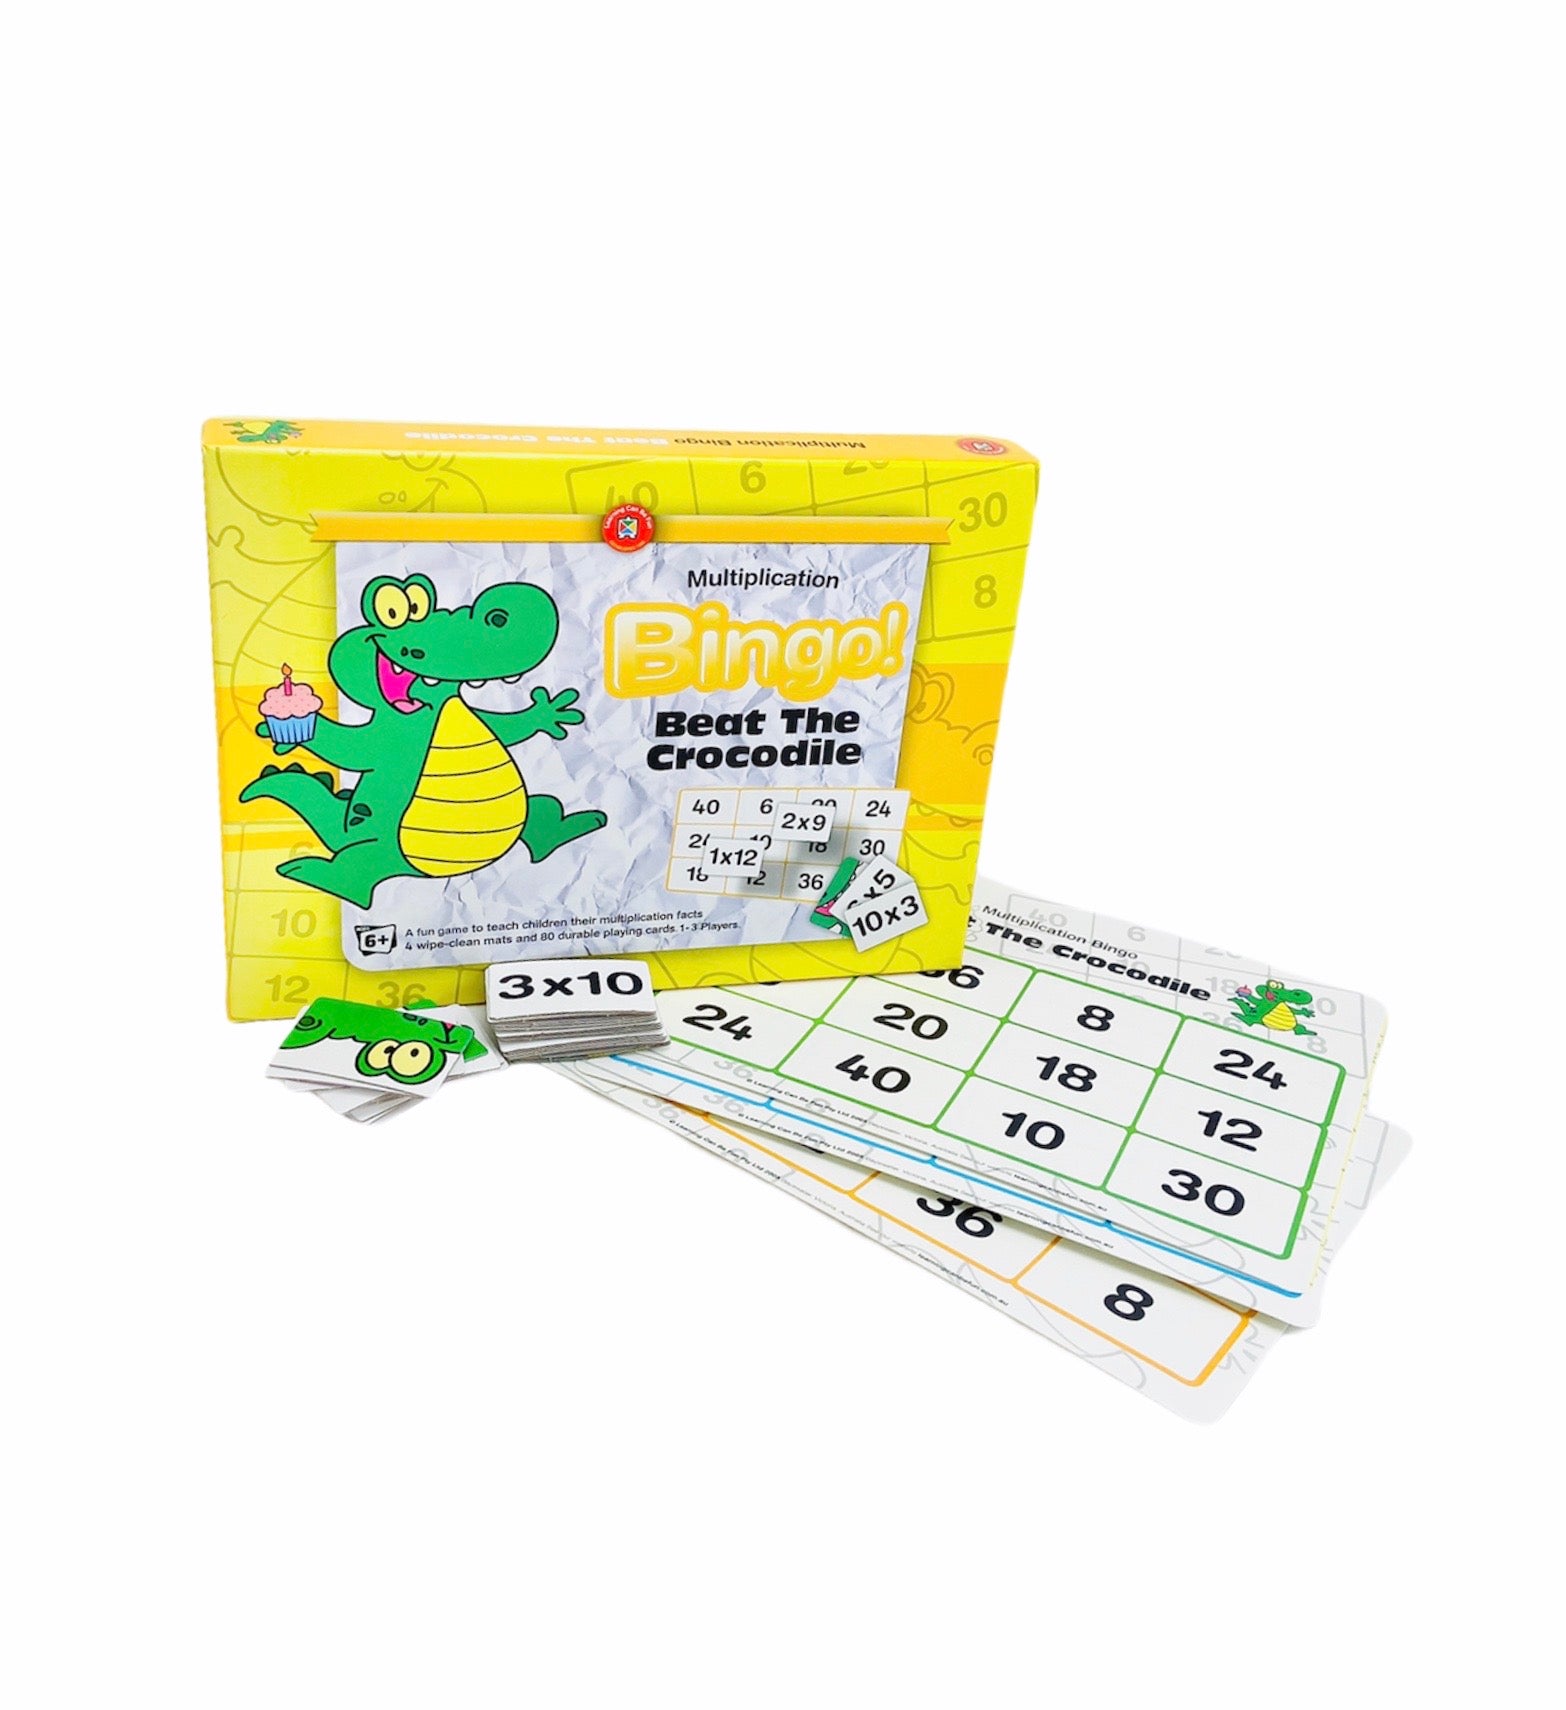 Beat the Crocodile Bingo! - Multiplication box standing behind the cards and mats from the bing game